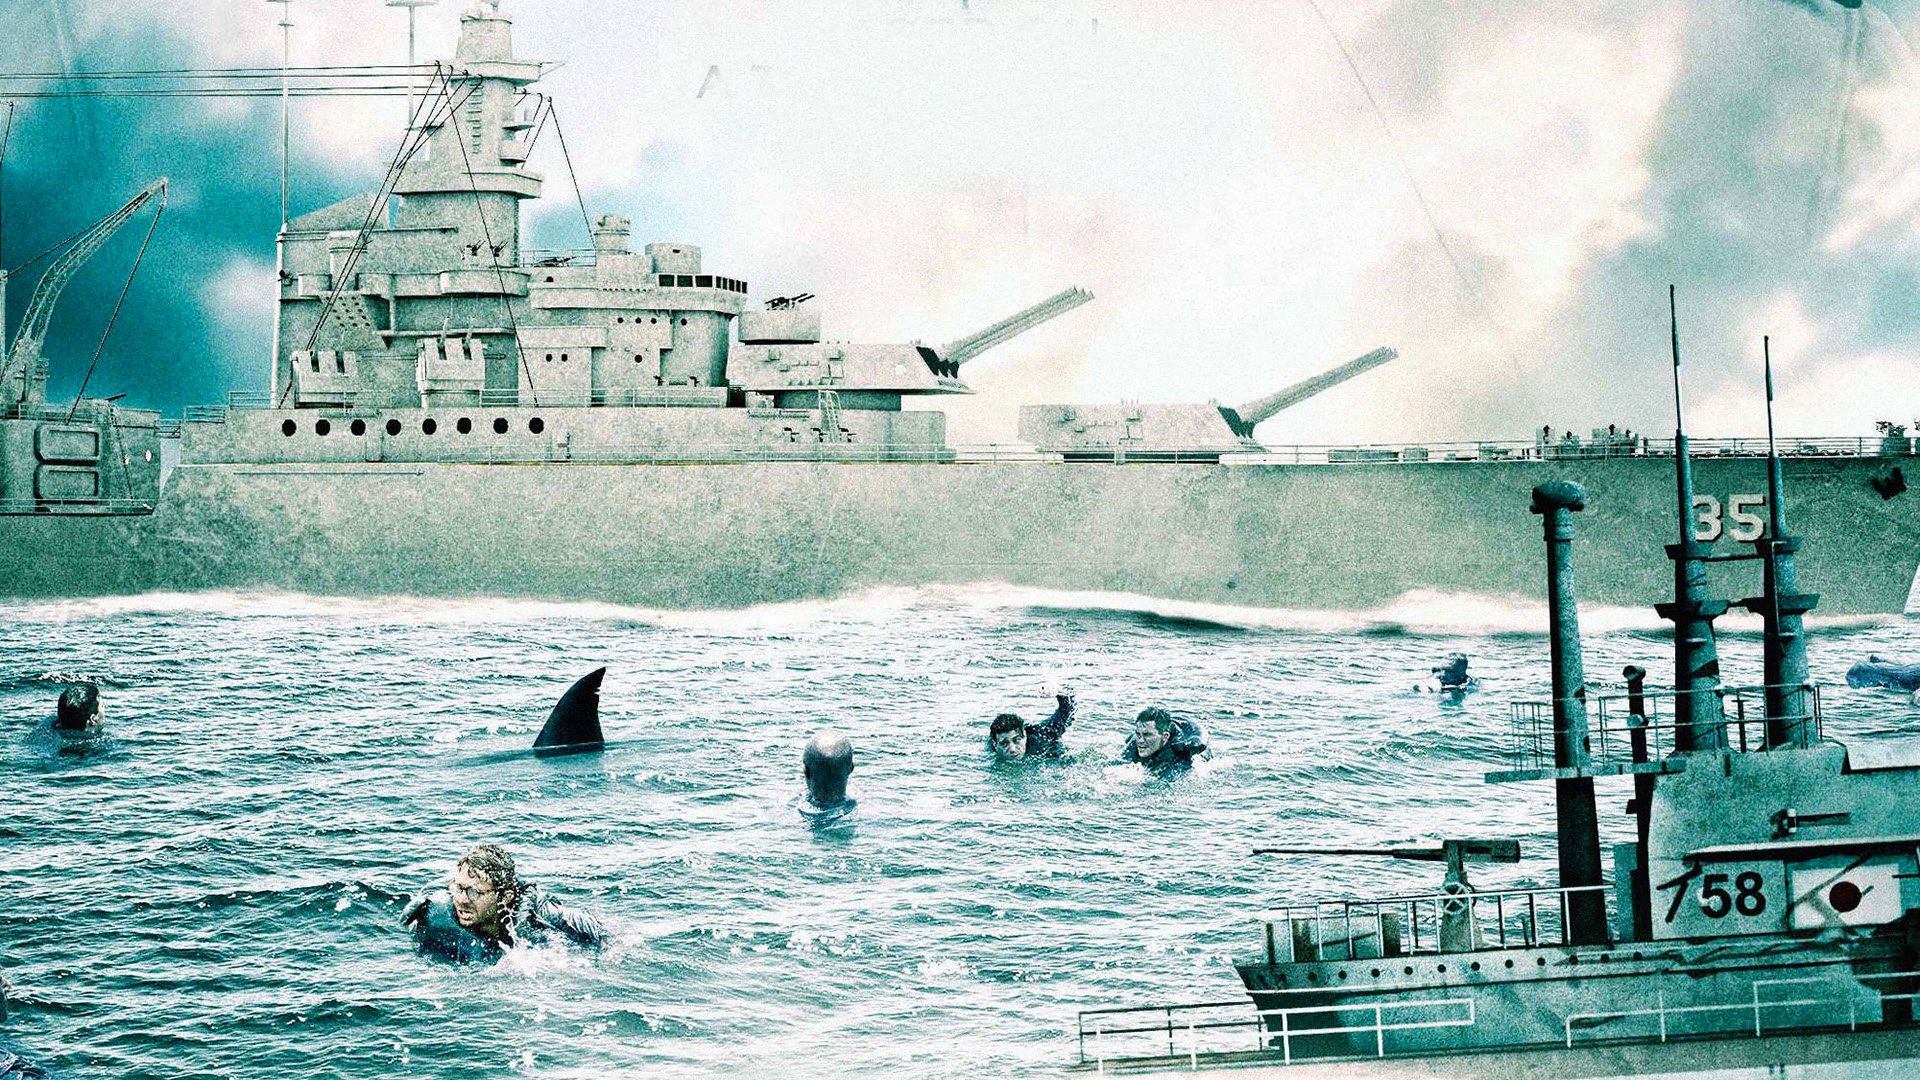 Uss Indianapolis Men Of Courage HD Wallpaper Background